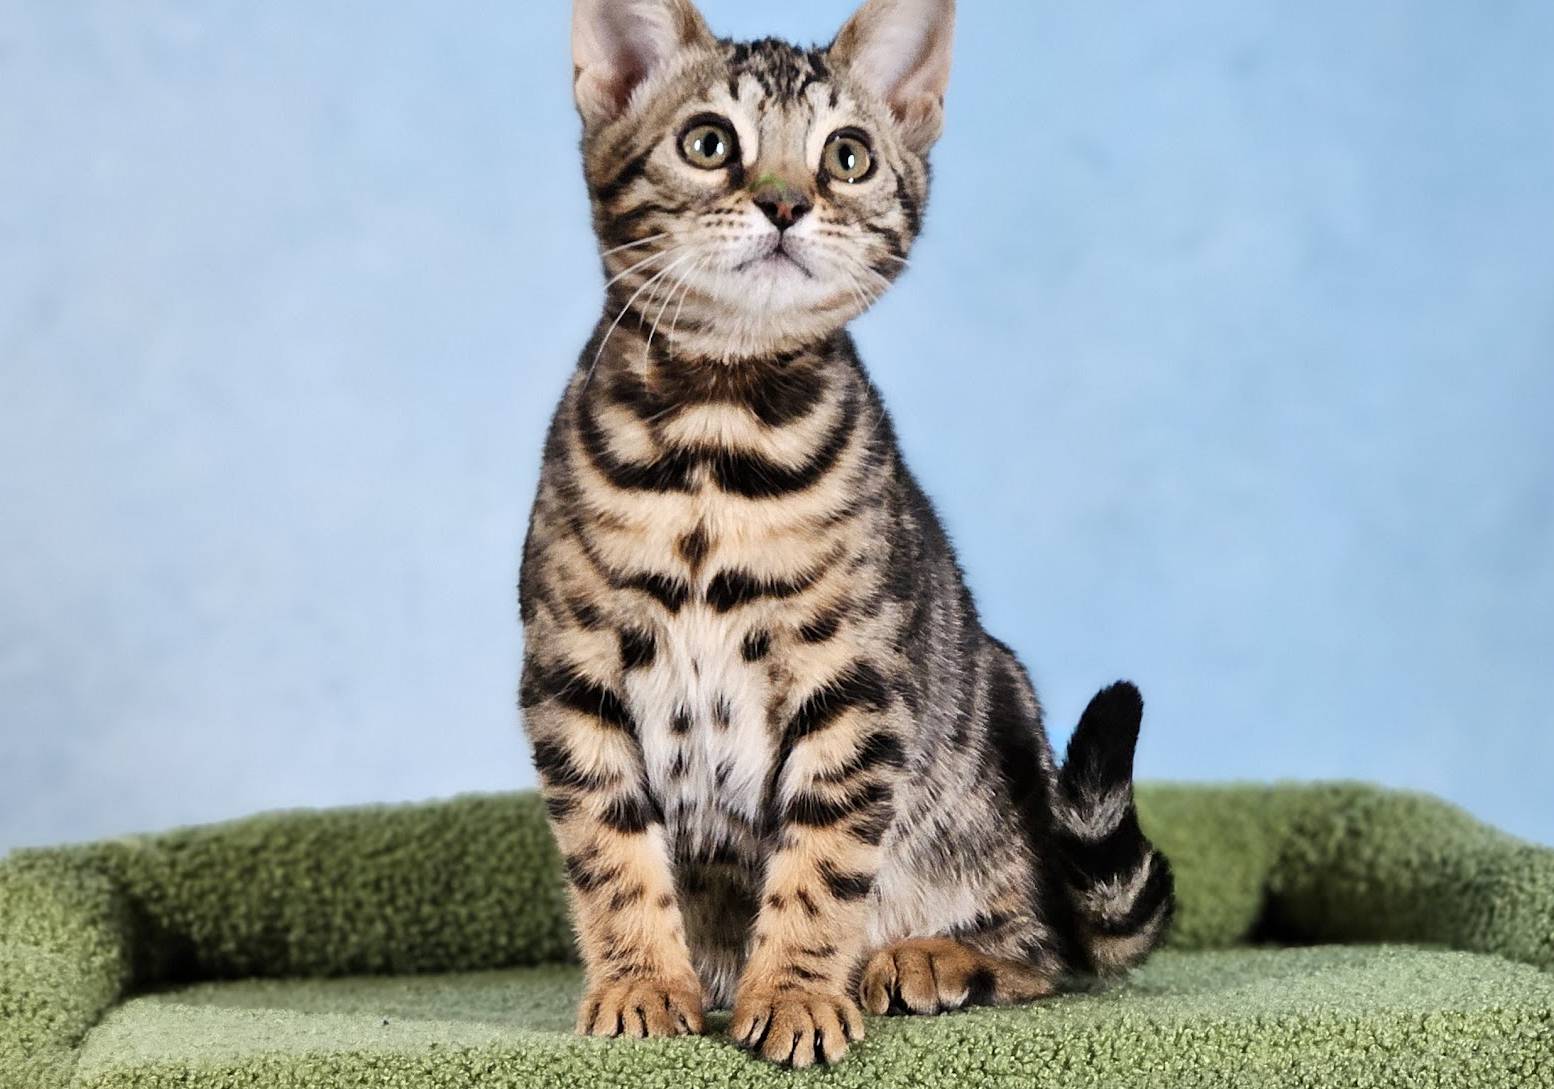 BROWN SPOTTED BENGAL KITTEN